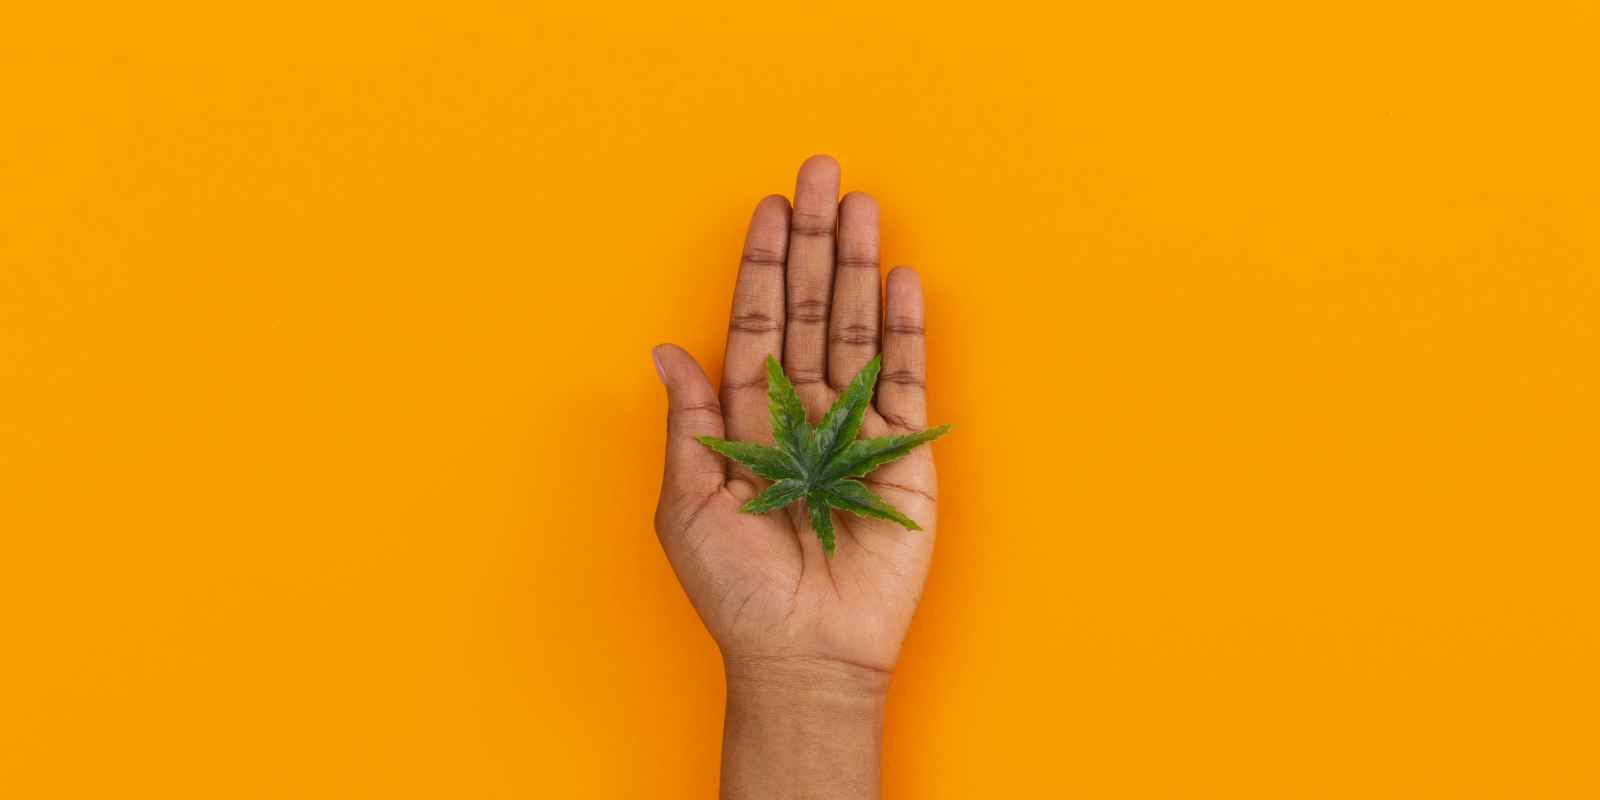 Yellow background with a Black or Brown person's hand holding a green marijuana leaf.